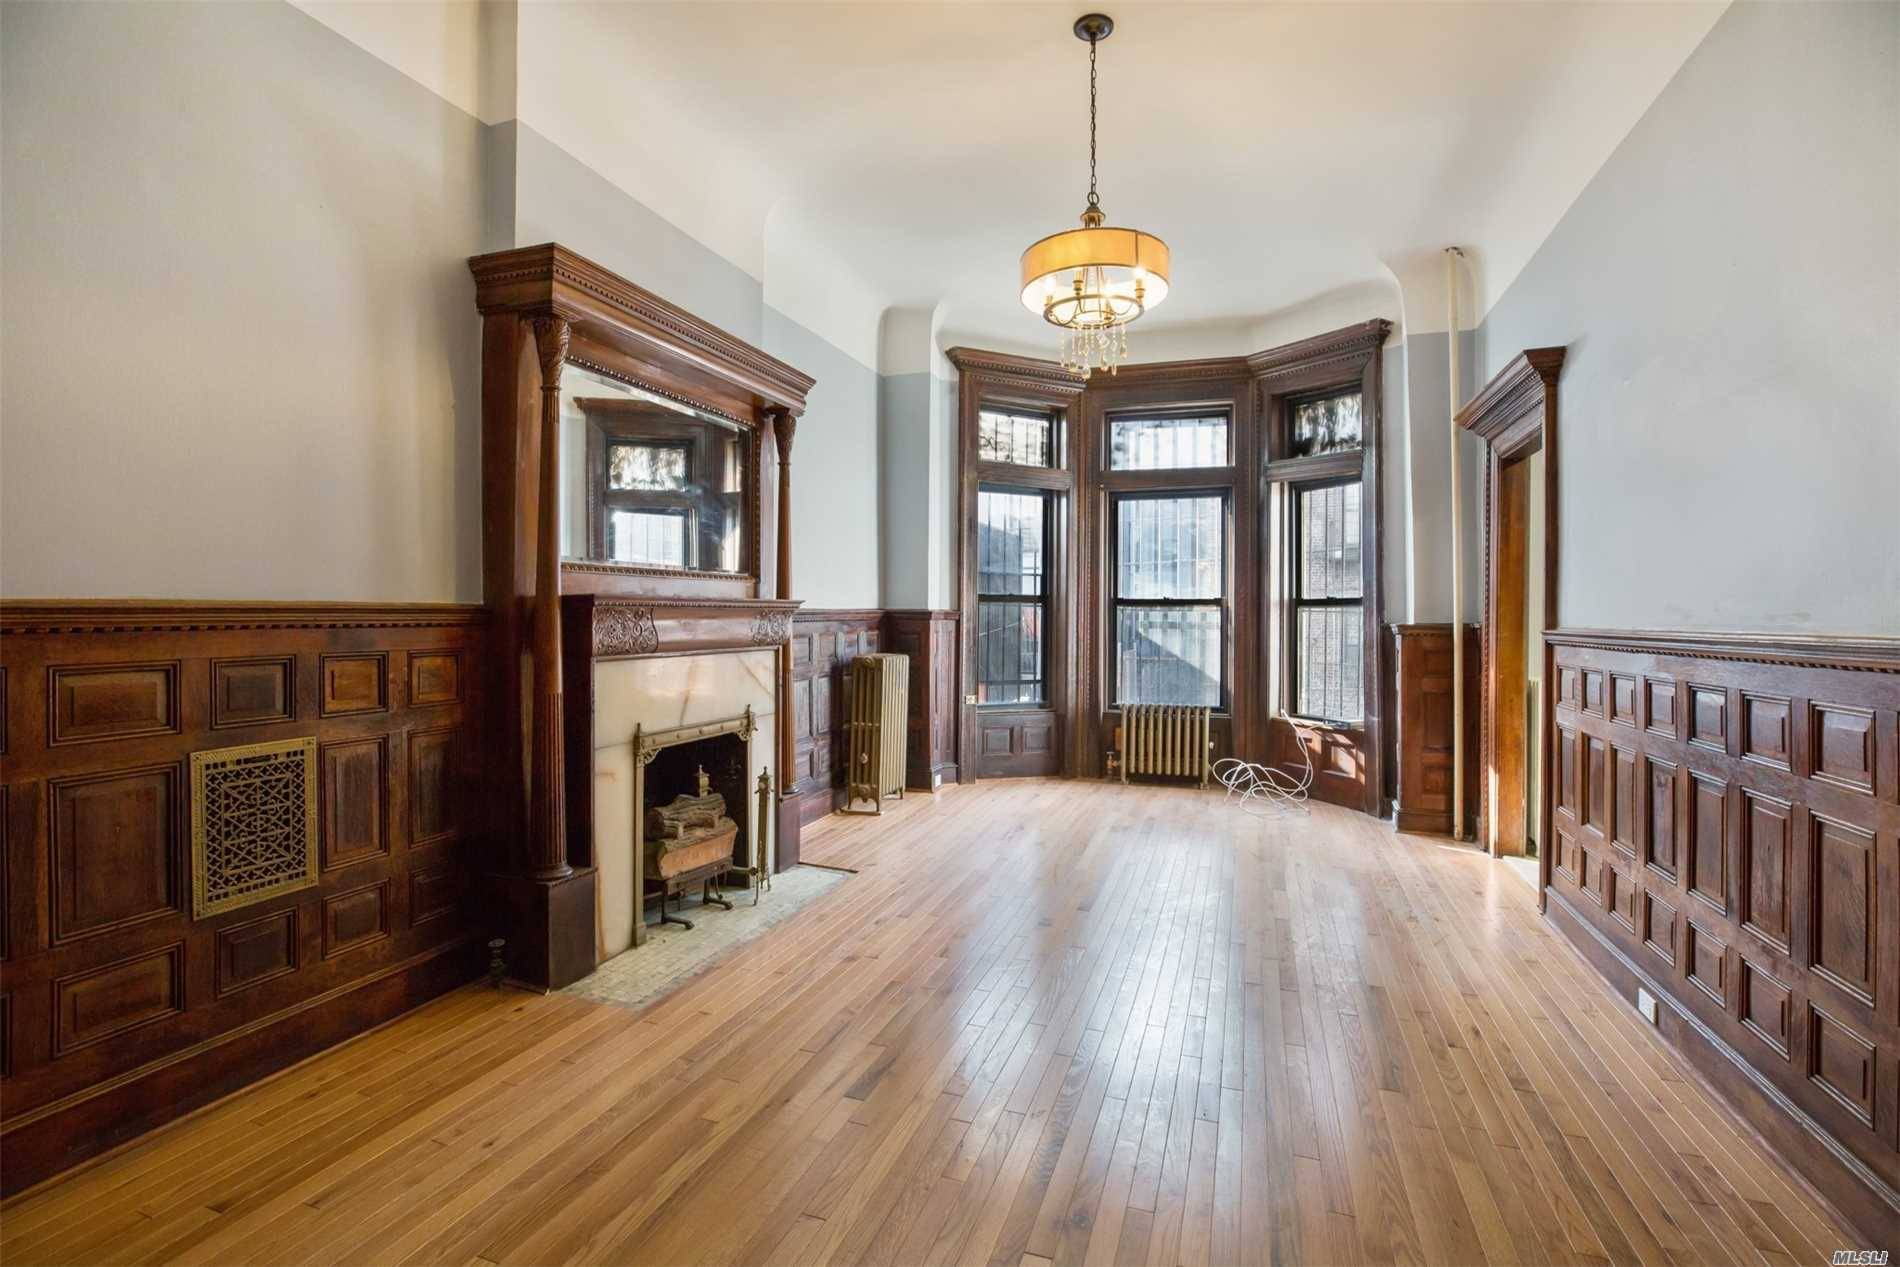 Sq Foot 4 Story Brownstone With Original Details And 4 Fireplaces.